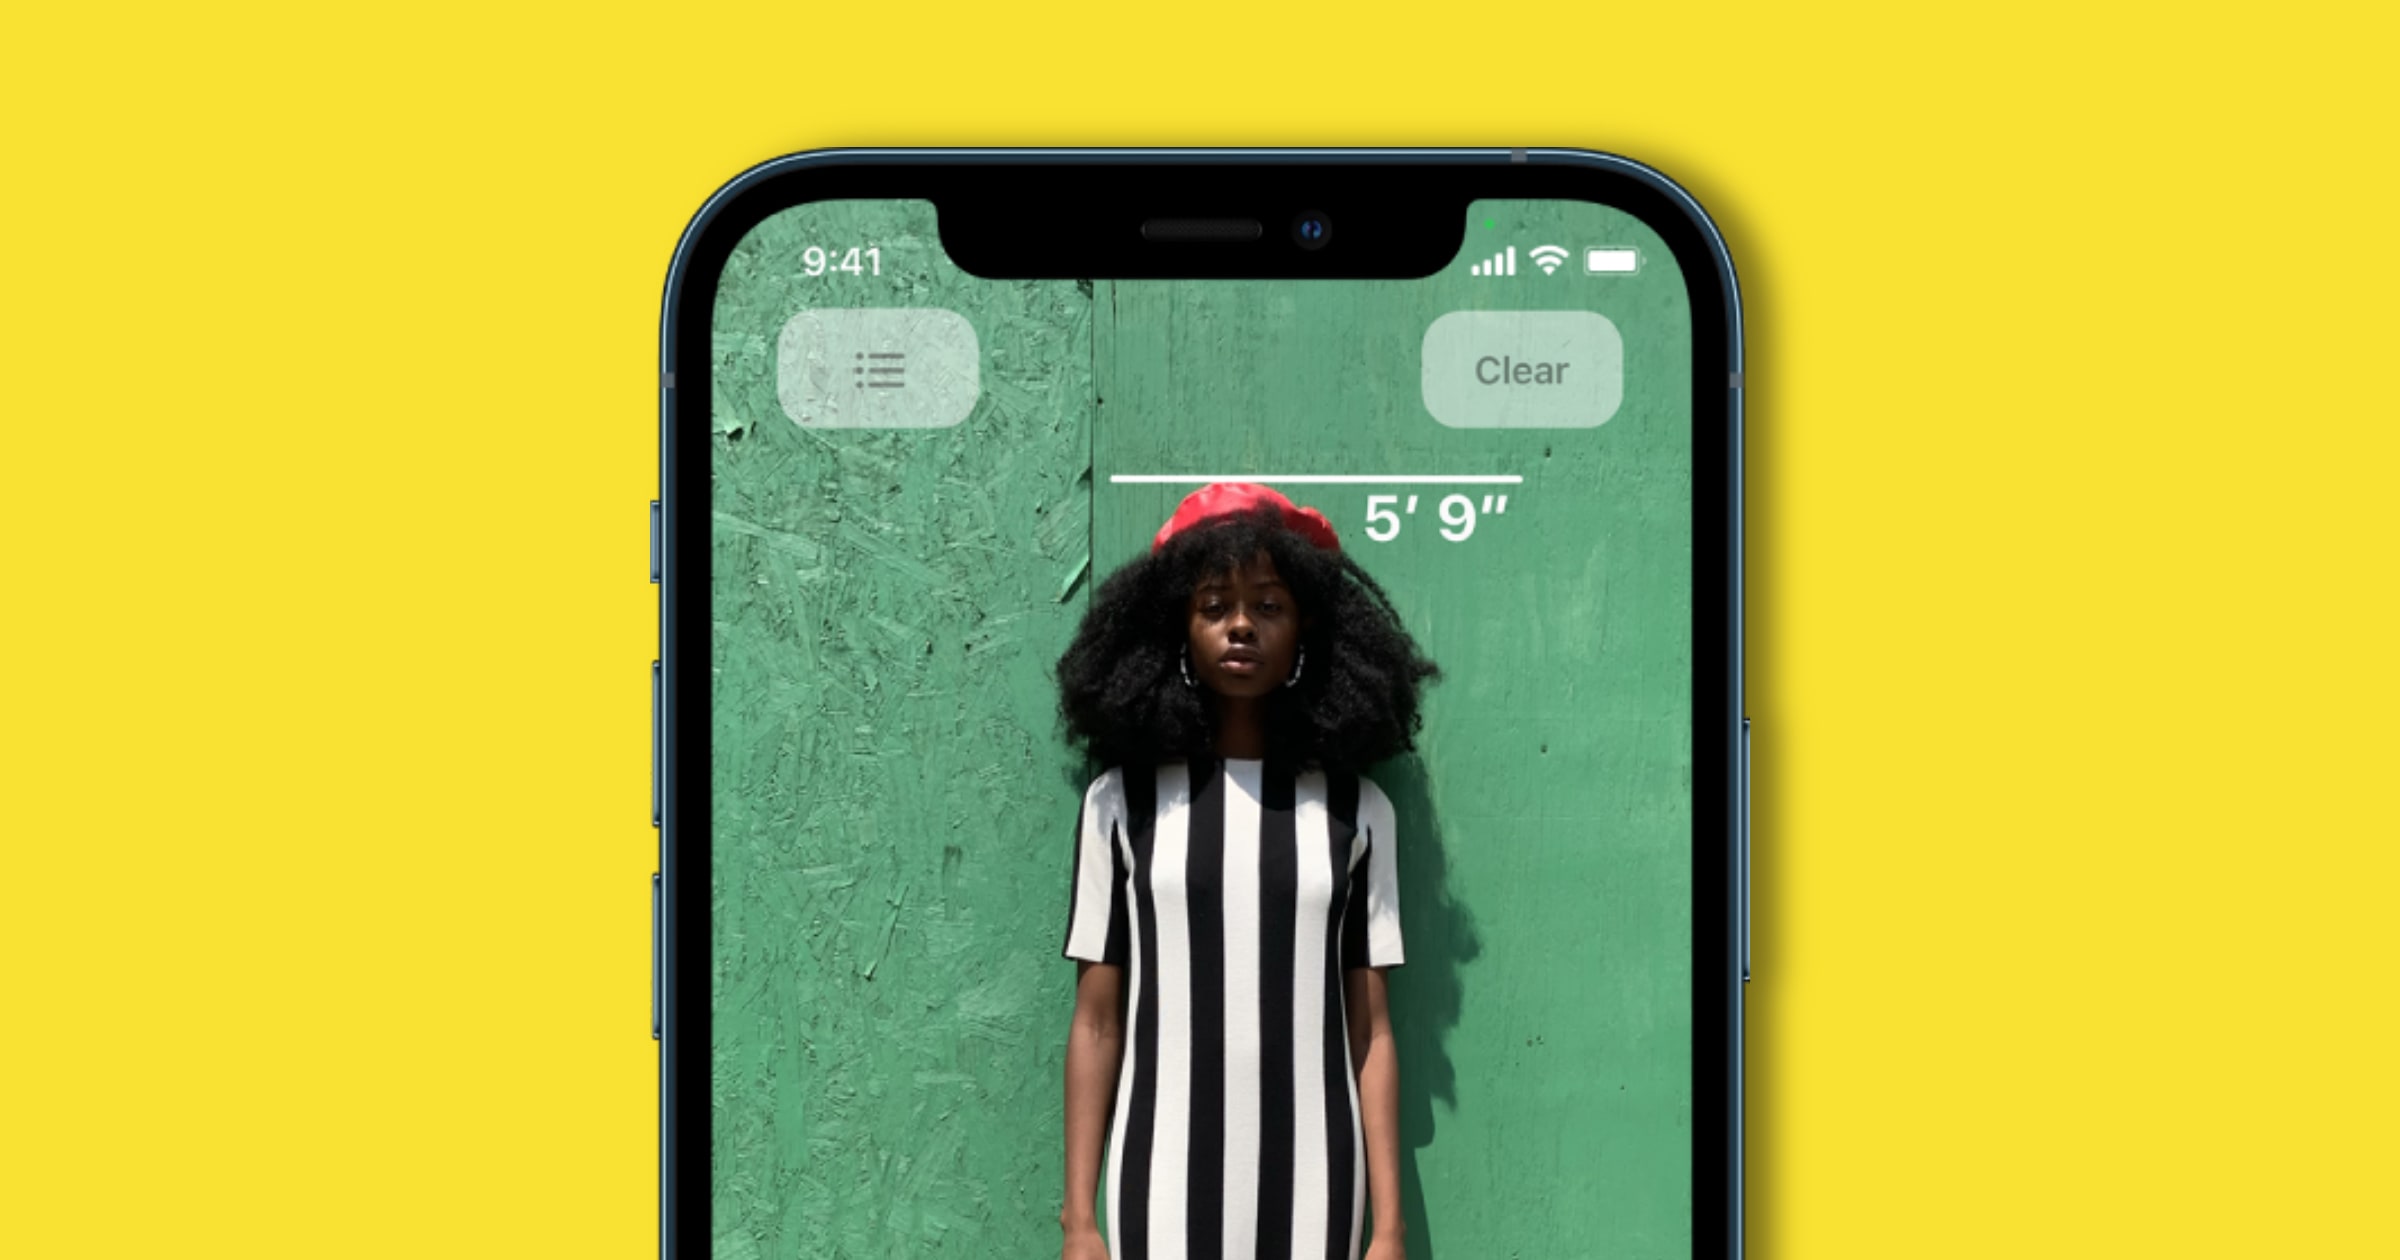 measure height with iPhone